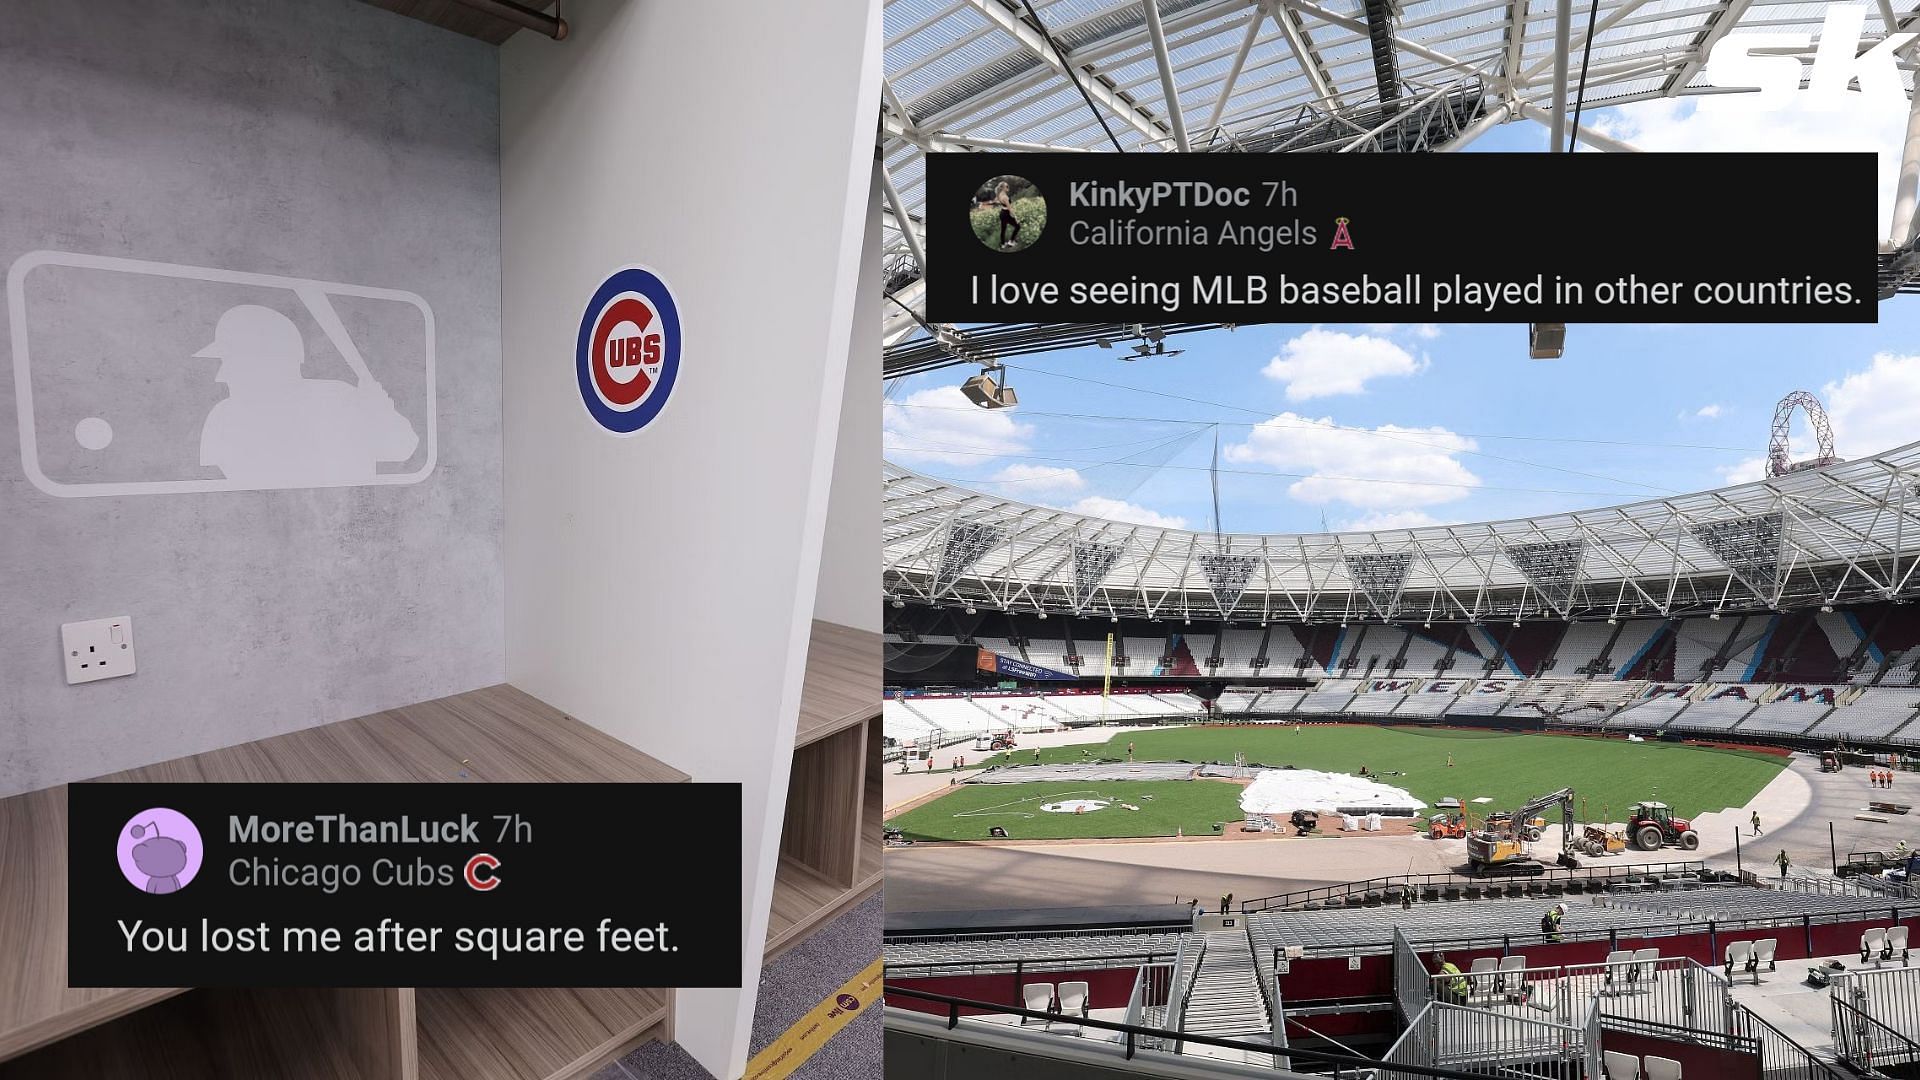 MLB Reddit reacts to stadium taking shape ahead of the London Series between Chicago Cubs and St